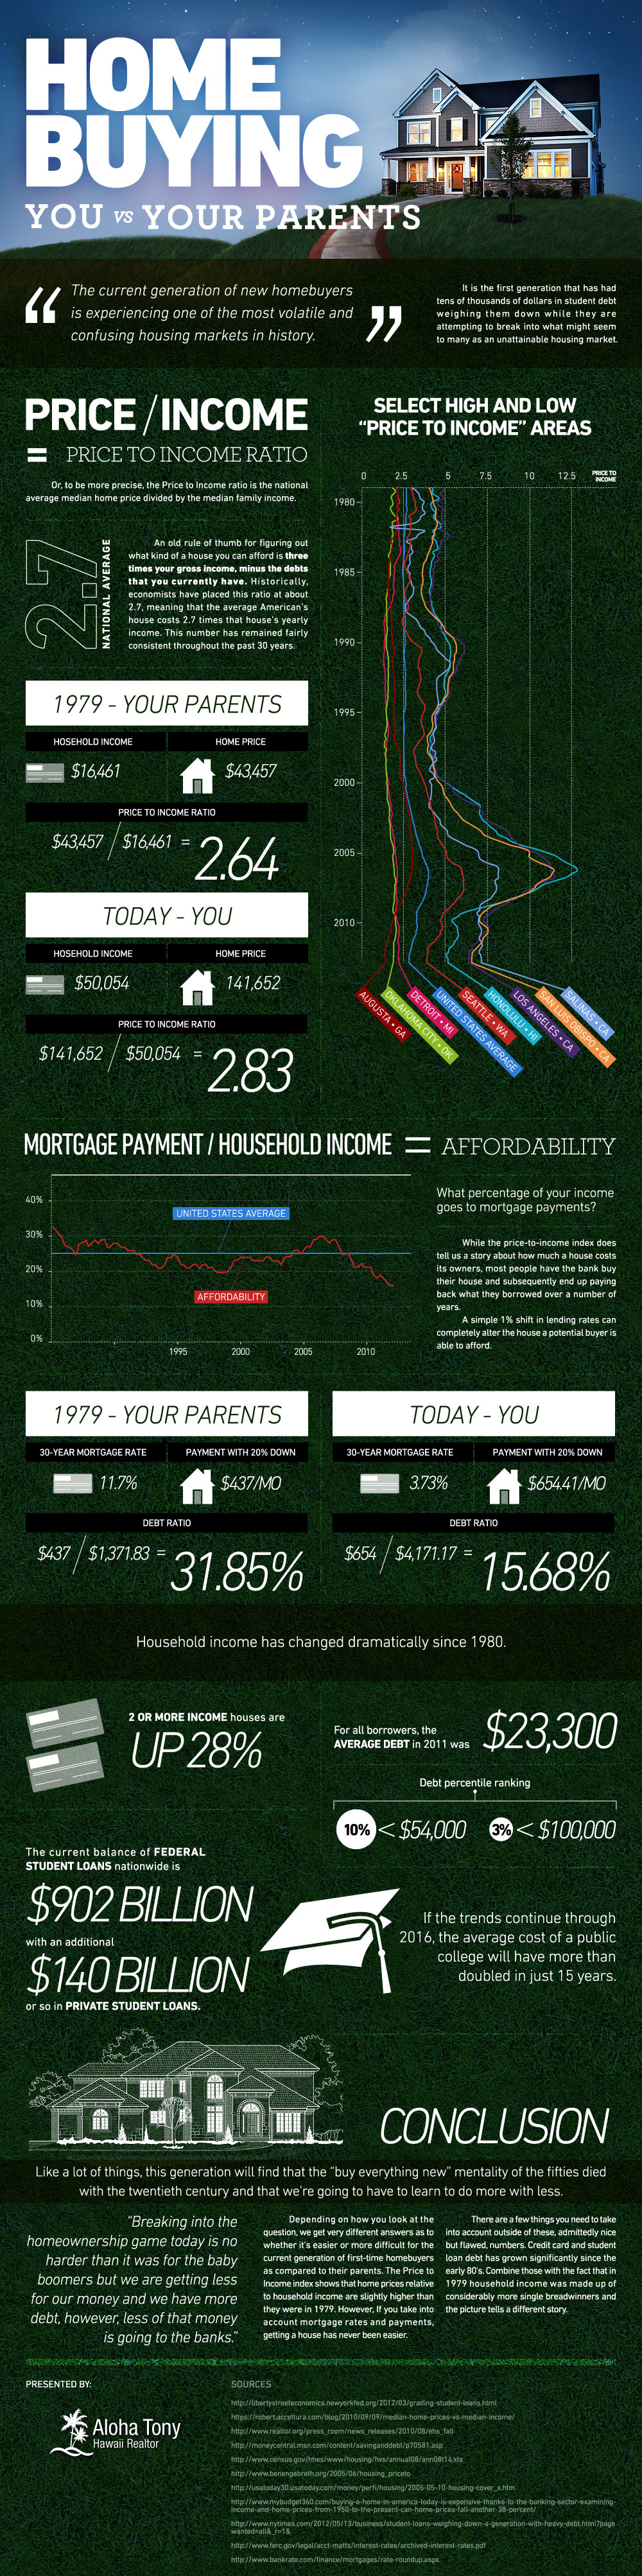 Home Buying: You vs Your Parents